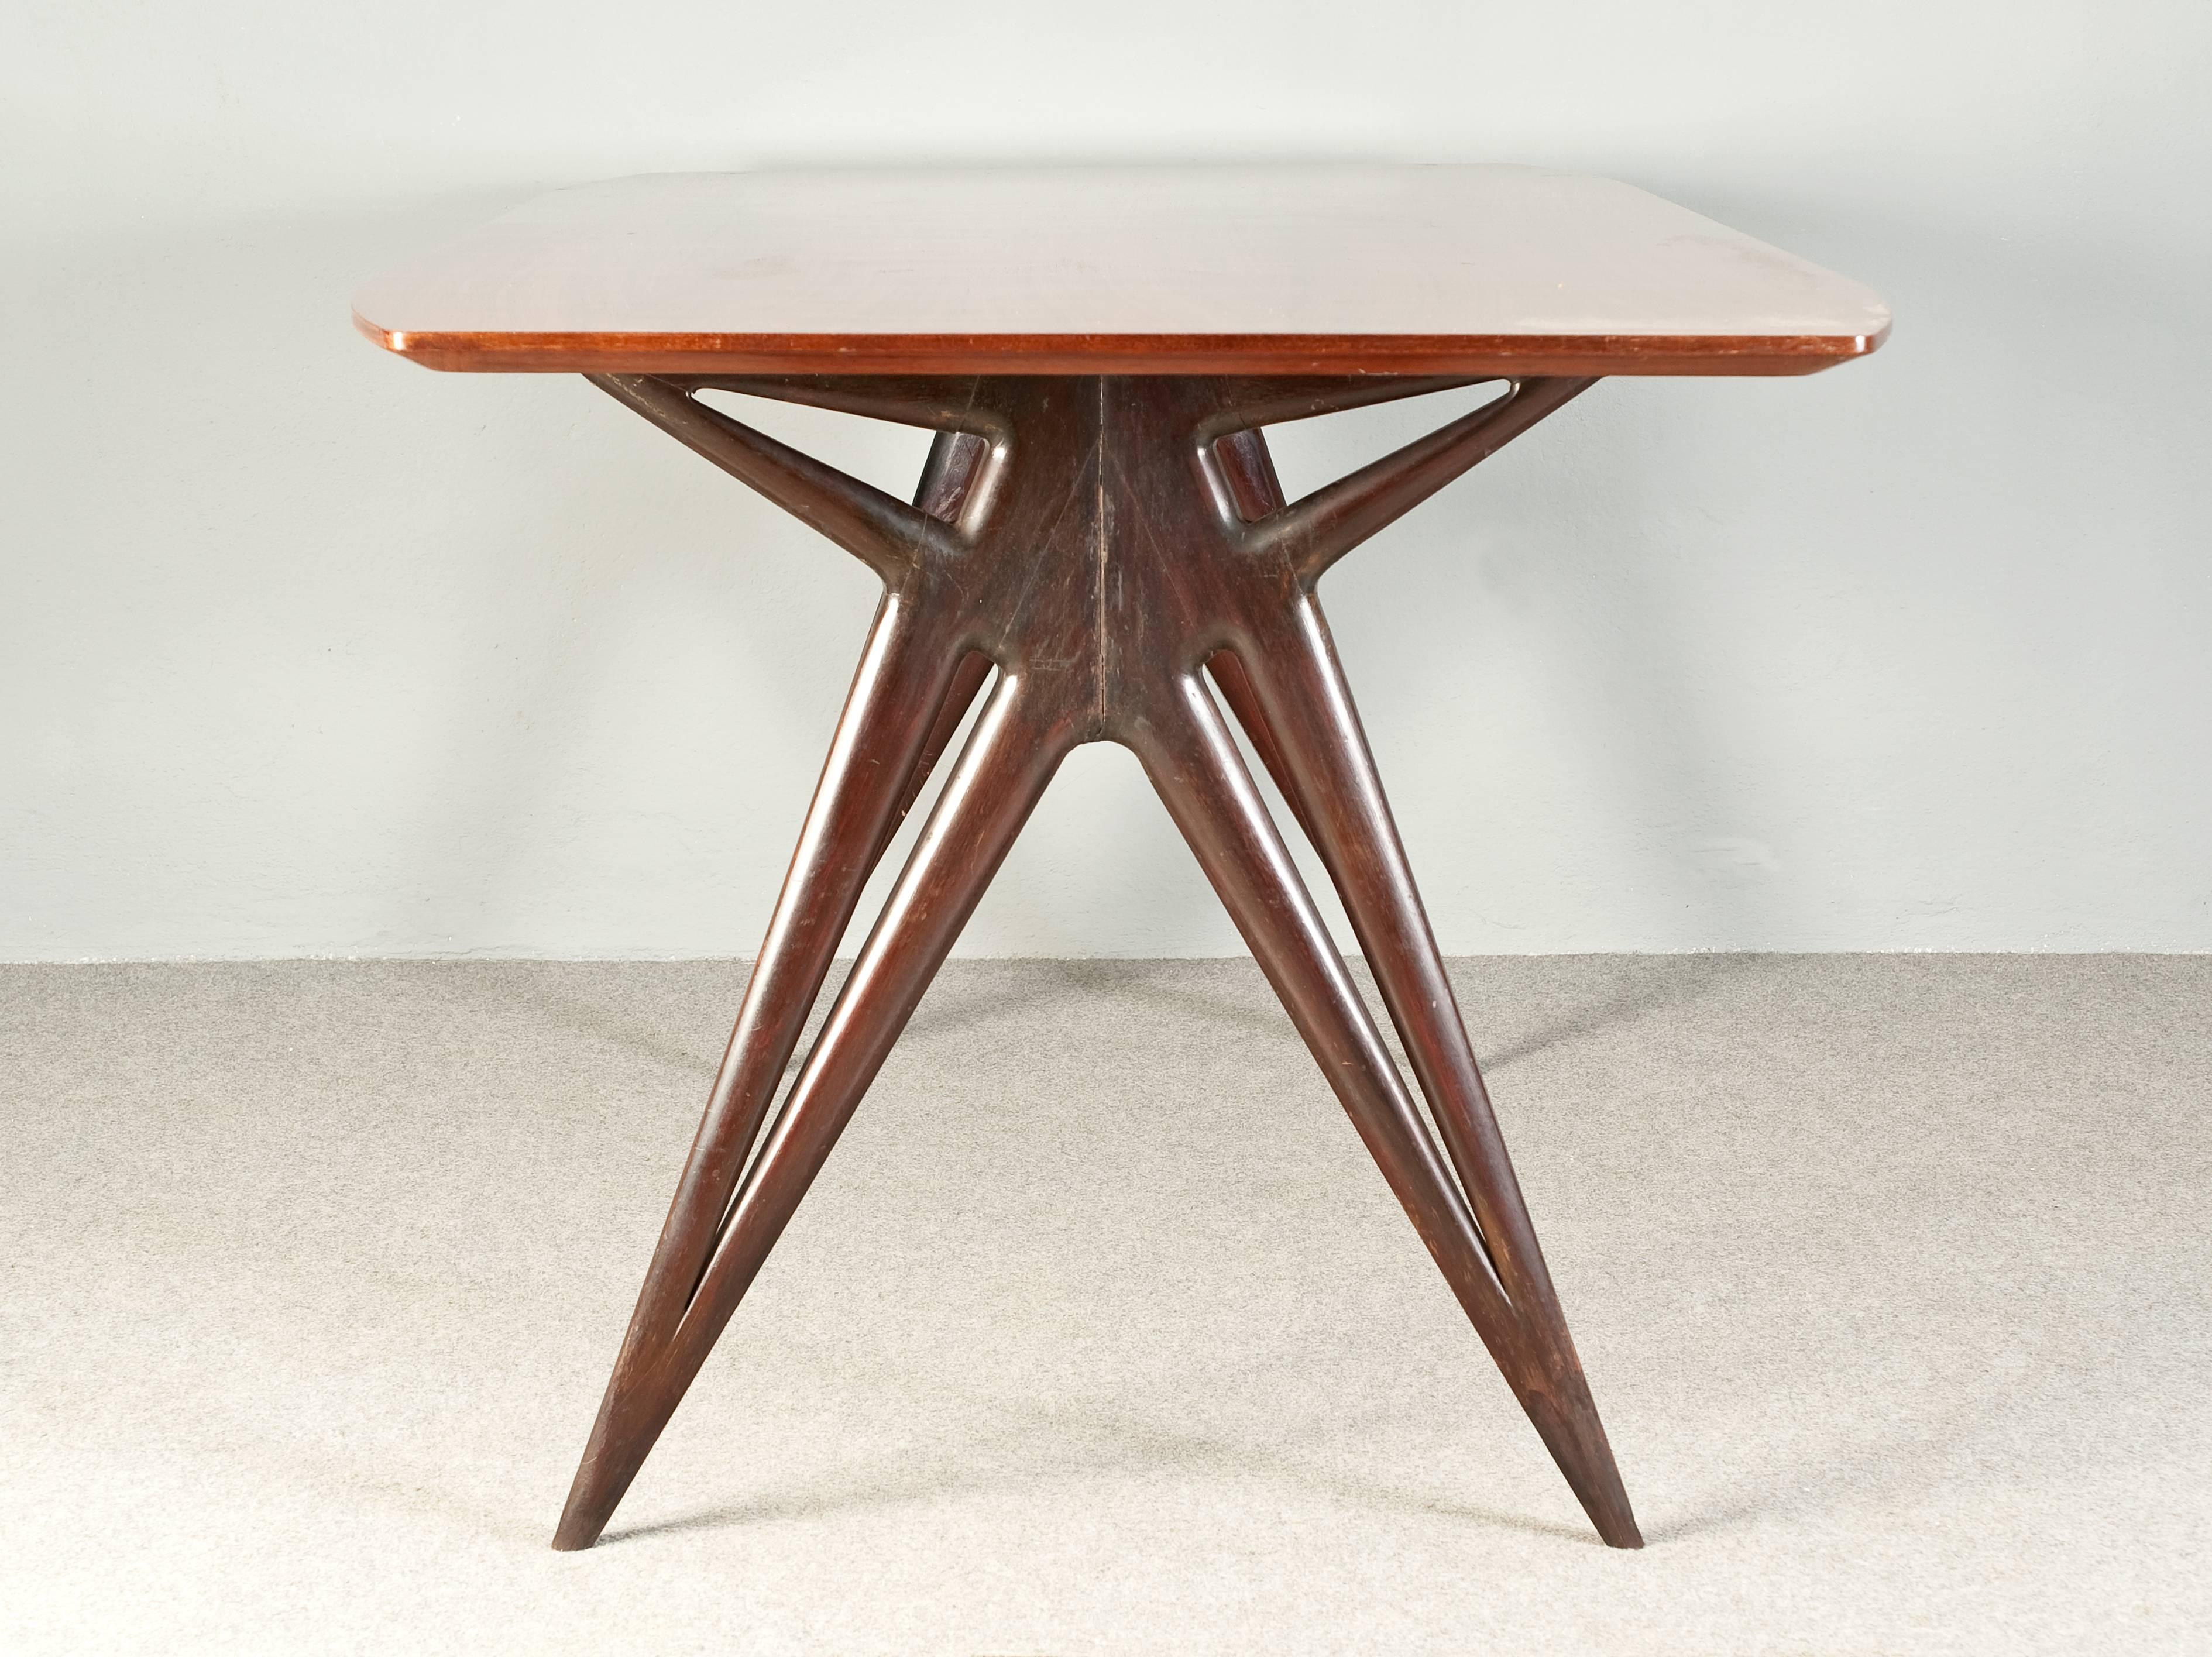 Italian Remarkable Dining Table Attributed to Ico Parisi, circa 1950